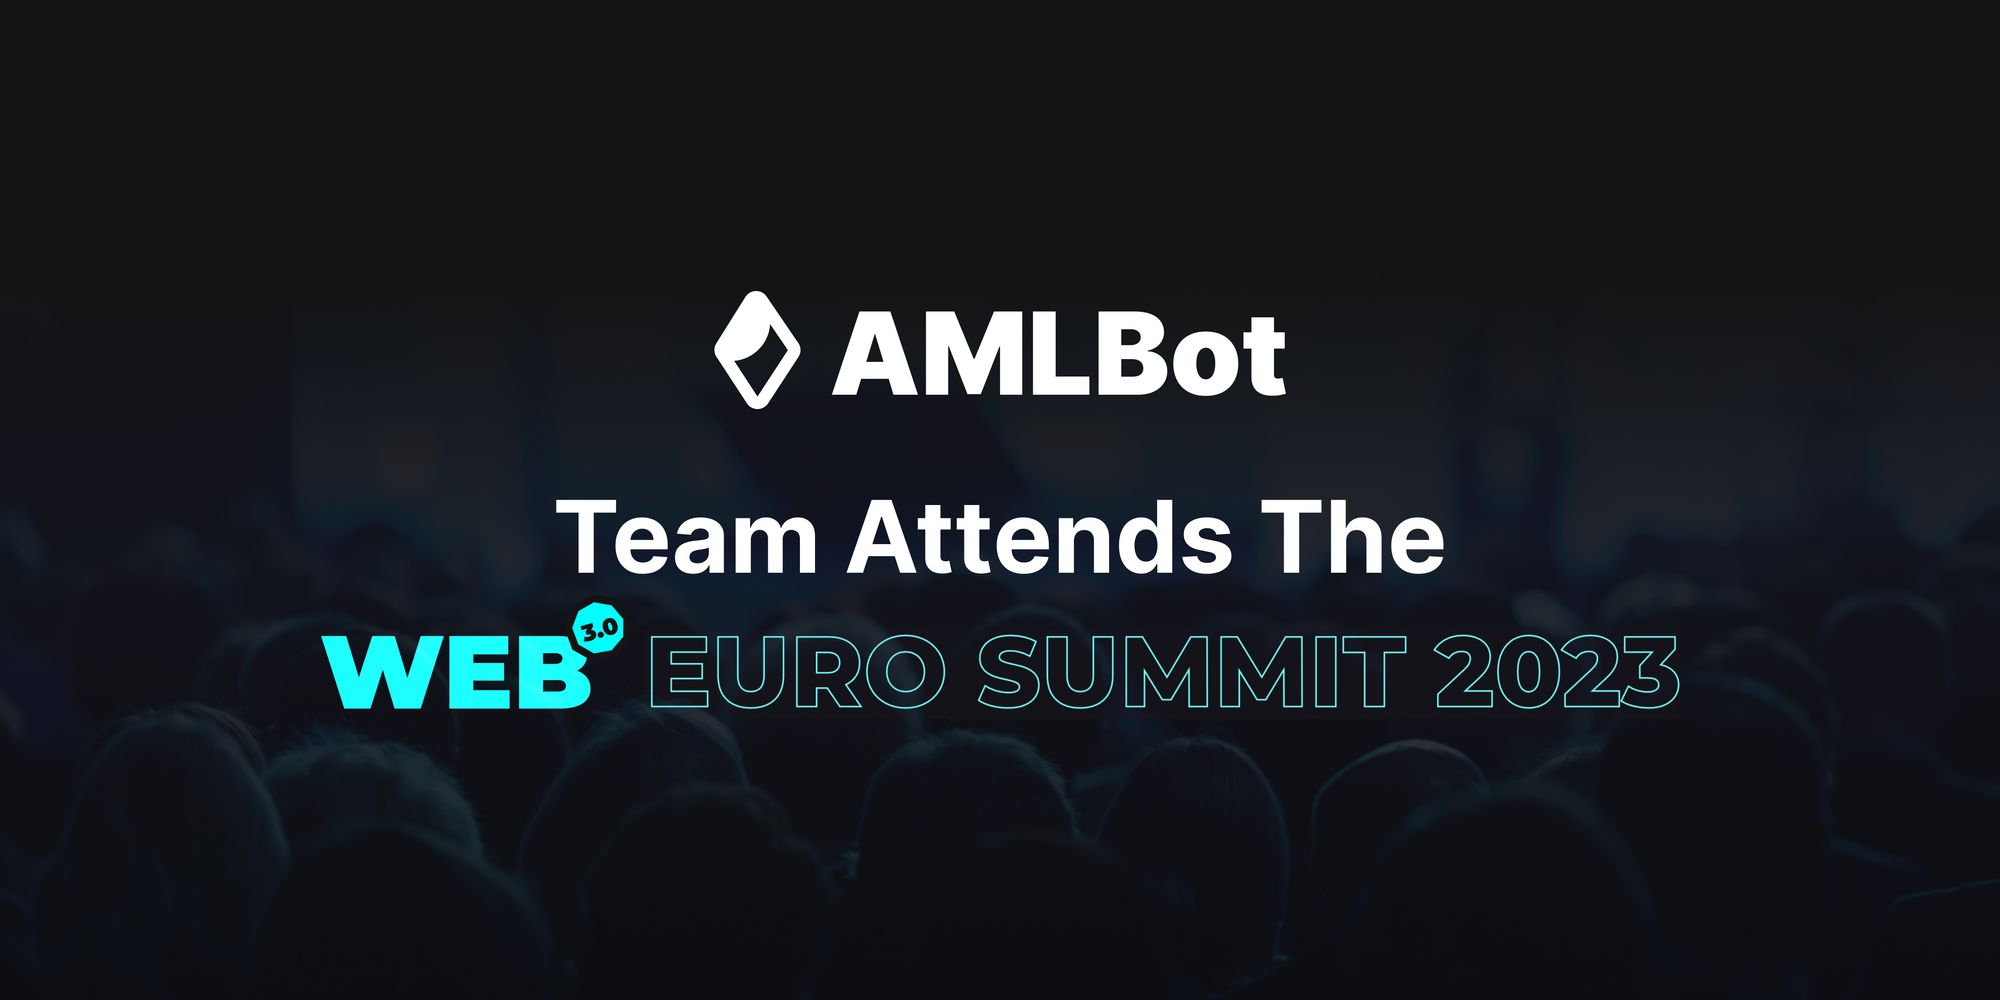 AMLBot Team Attends The  Web3 Euro Summit 2023